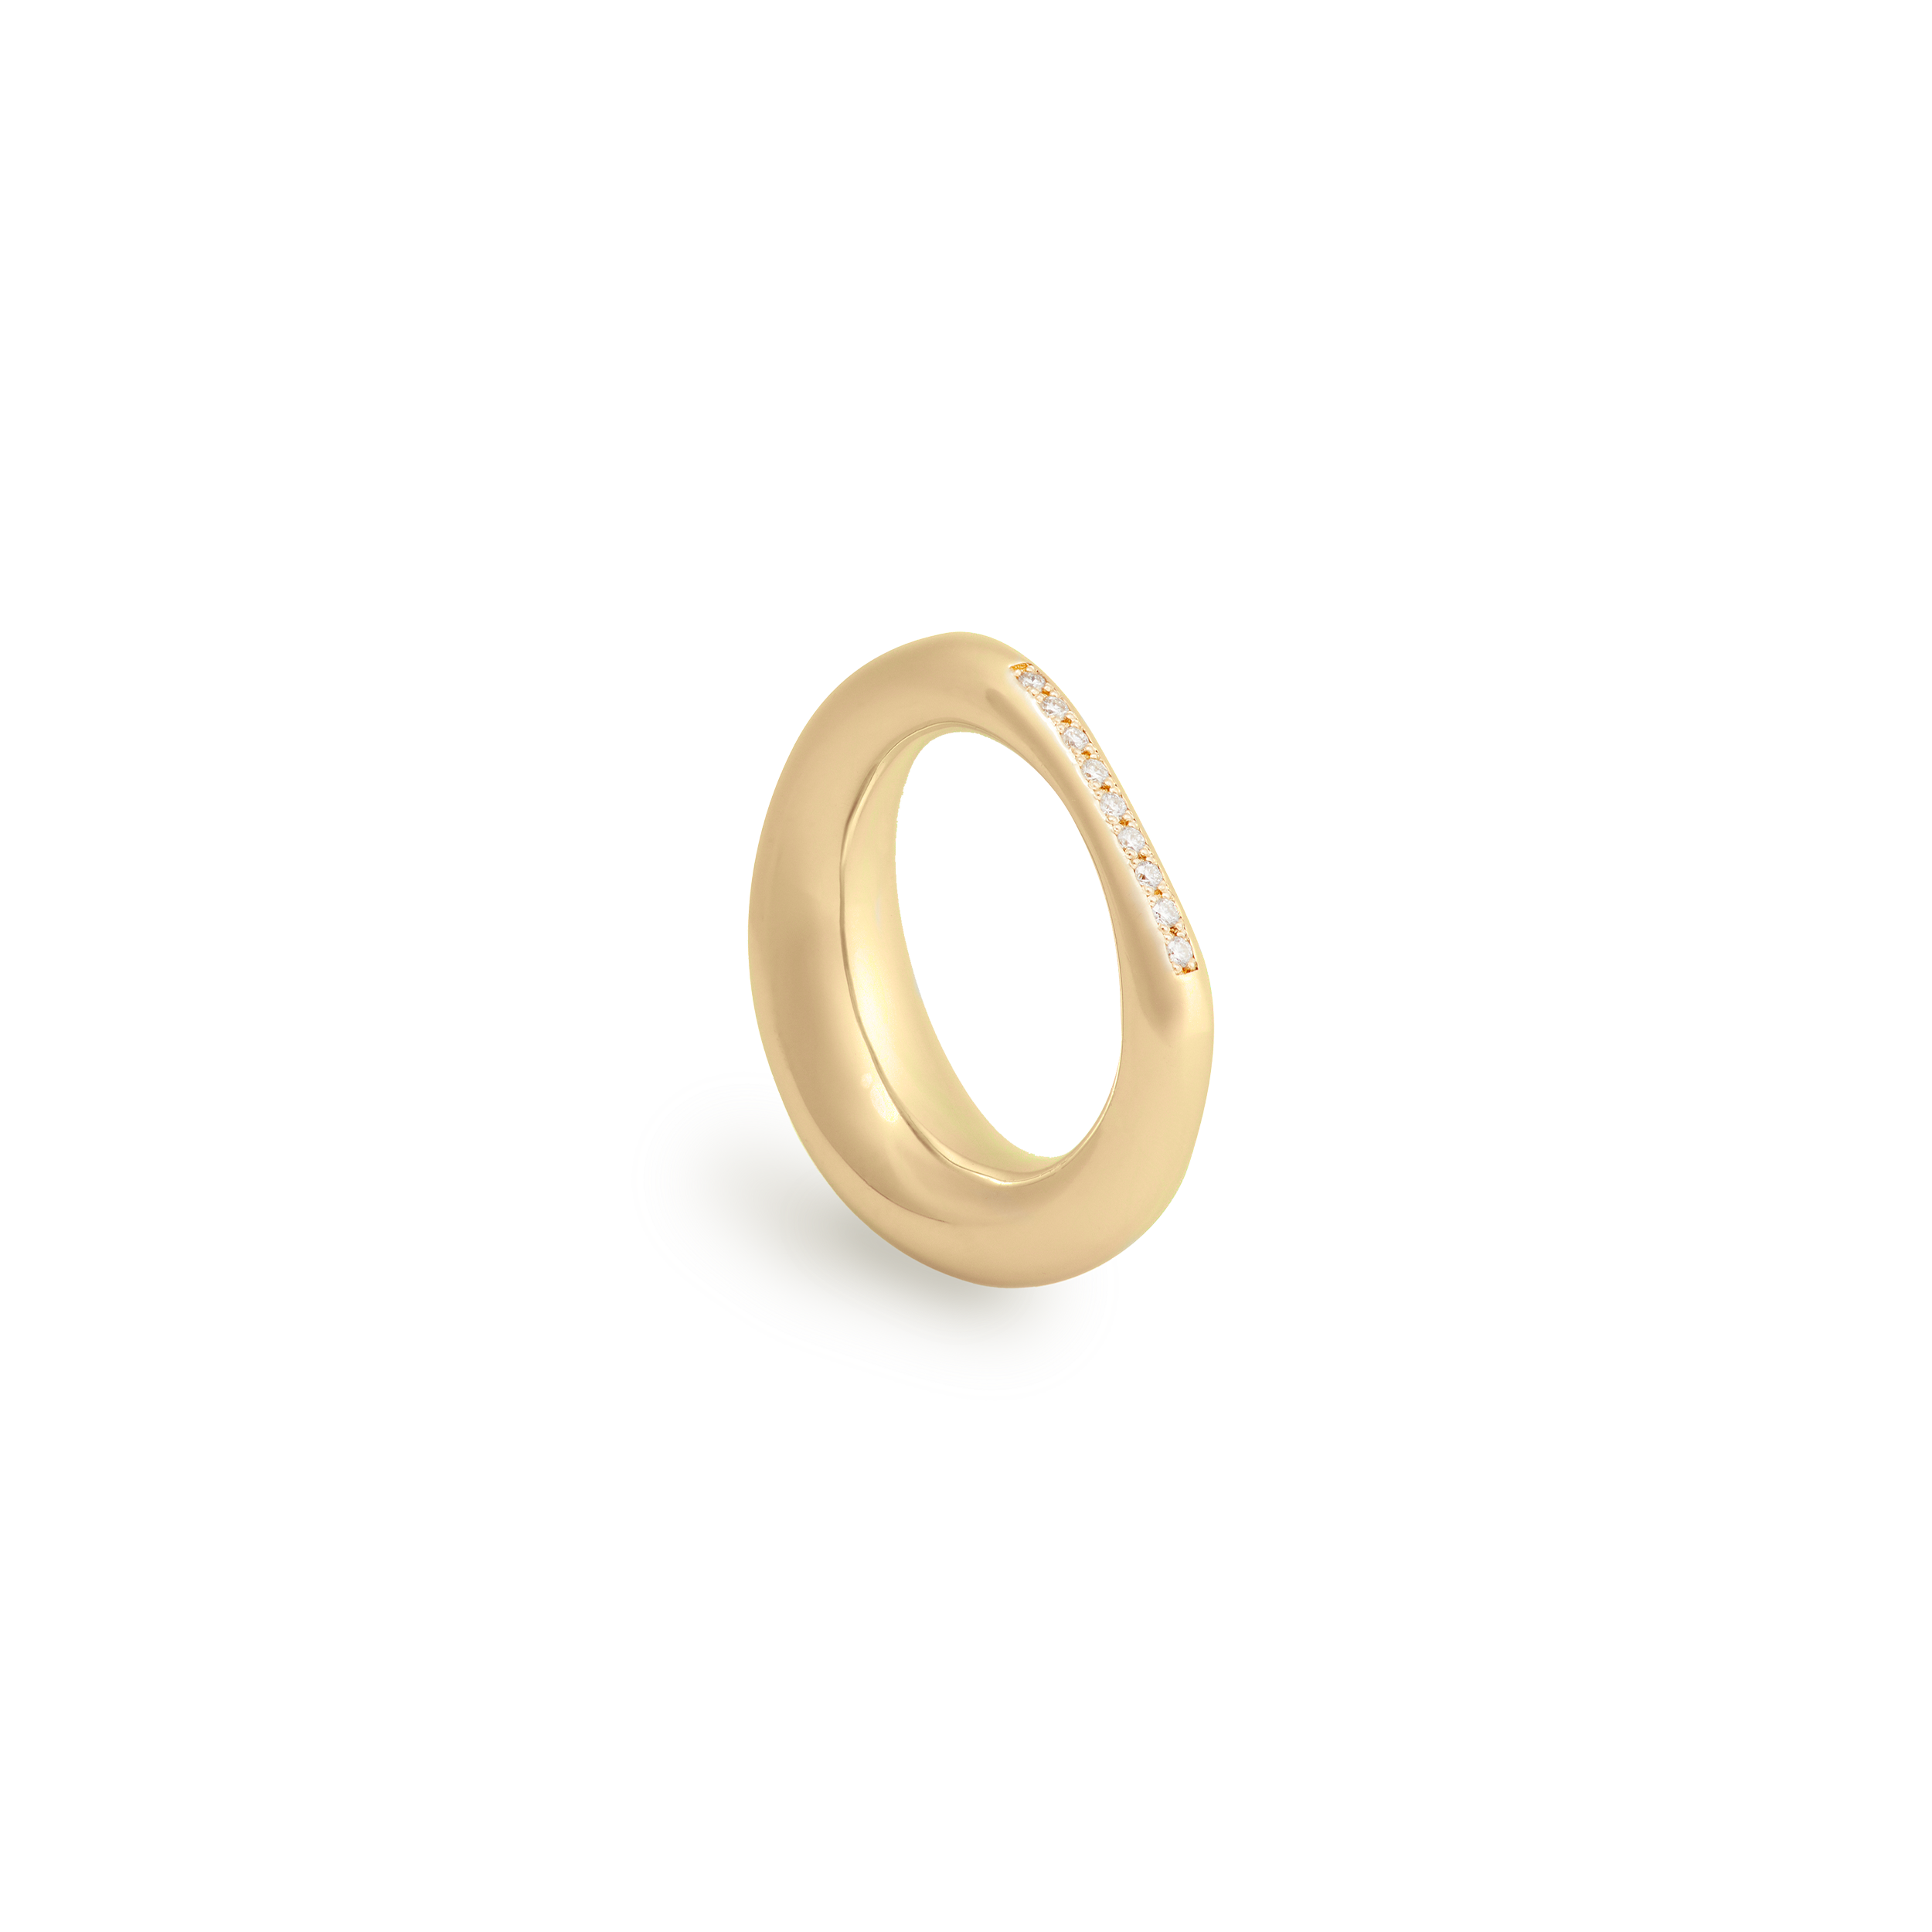 Peggy Semi-Domed Ring in Yellow Gold with a Row of White Diamonds